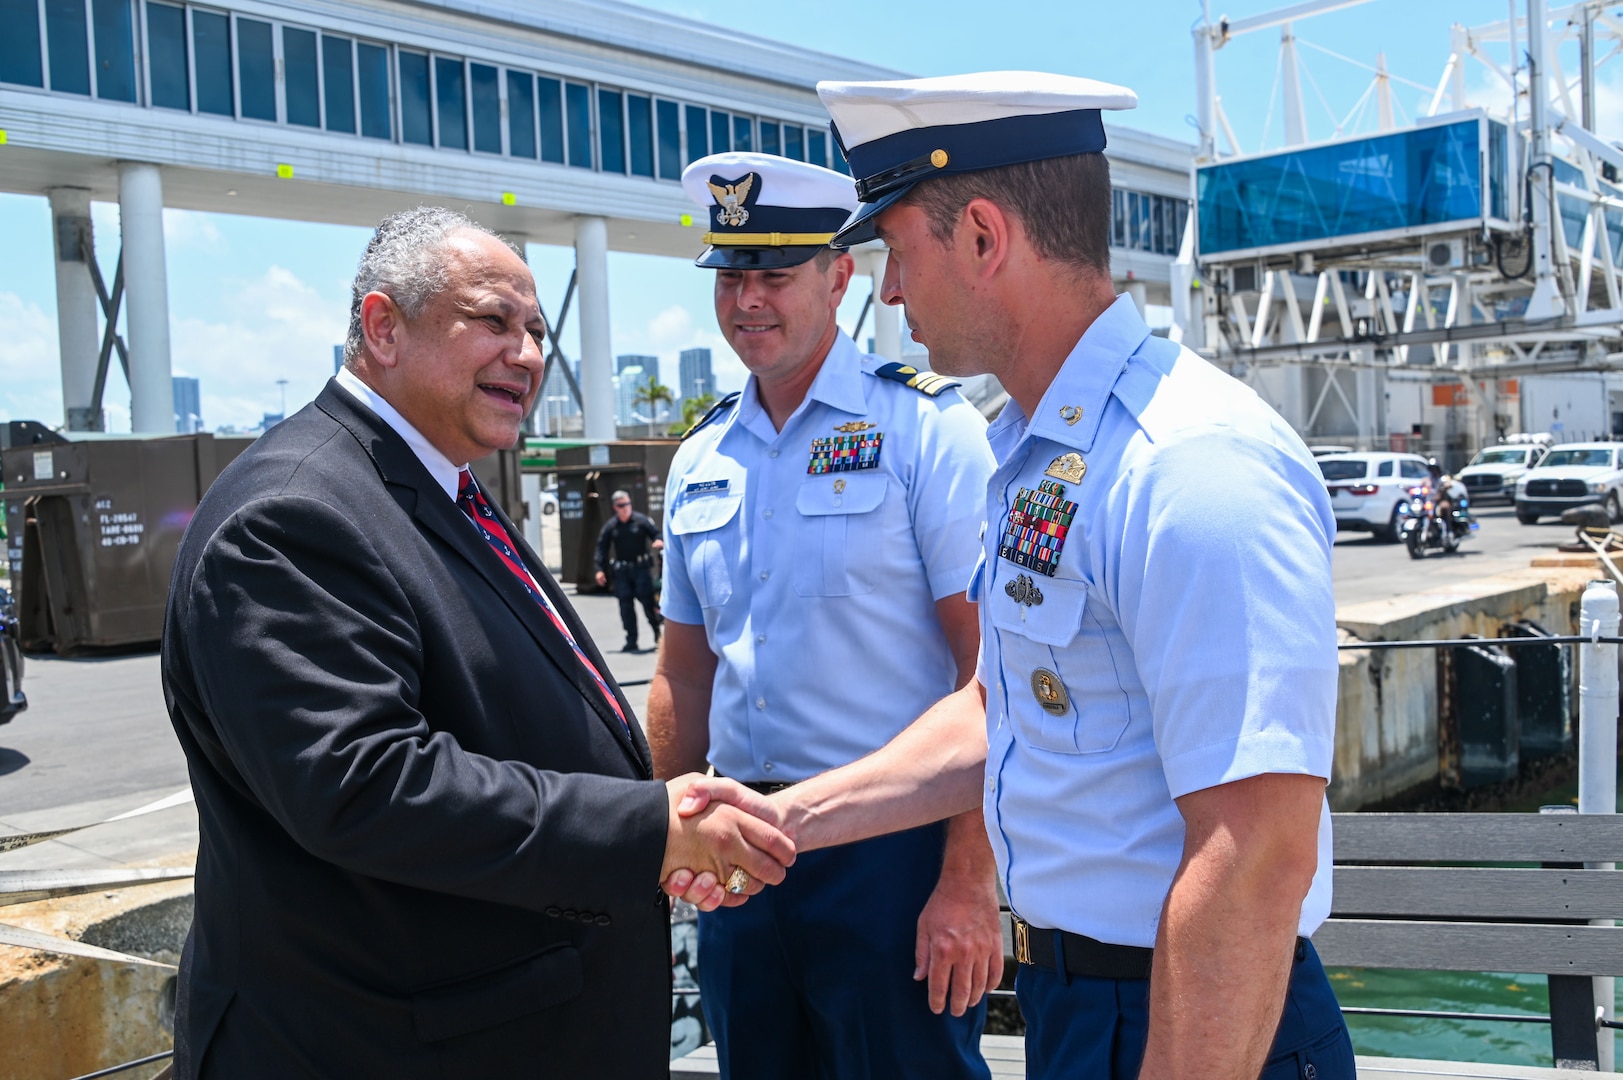 Secretary of the Navy Carlos Del Toro greets USCGC Seneca (WMEC 906) executive officer Lt. Cmdr. Bryan Kilcoin and Chief Petty Officer Edward Hinshelwood-Ahmann during a brief visit to the medium endurance cutter at PortMiami during Fleet Week Miami May 7, 2024. Del Toro is the 78th Secretary of the Navy and is responsible for over 900,000 Sailors, Marines, reservists, and civilian personnel. (U.S. Coast Guard photo by Petty Officer 2nd Class Diana Sherbs)